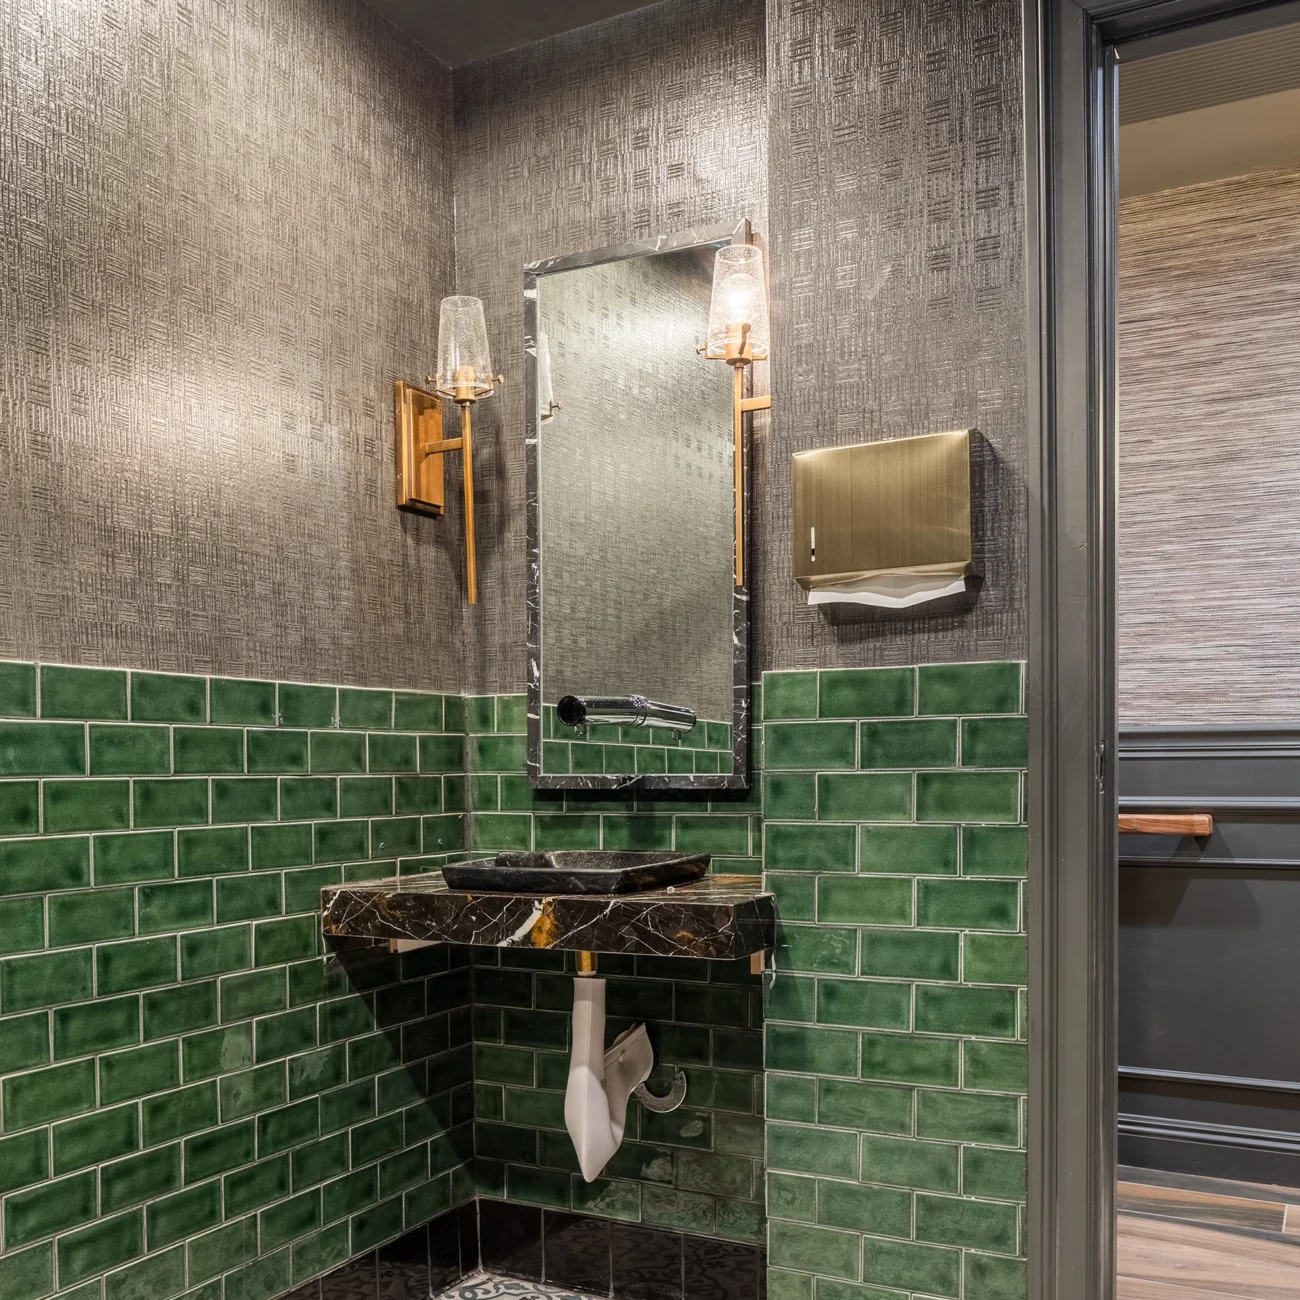 Christine Vroom Interiors Pacific Standard | Contemporary Restaurant Bathroom sink and mirror with green subway tiles and marbled sink